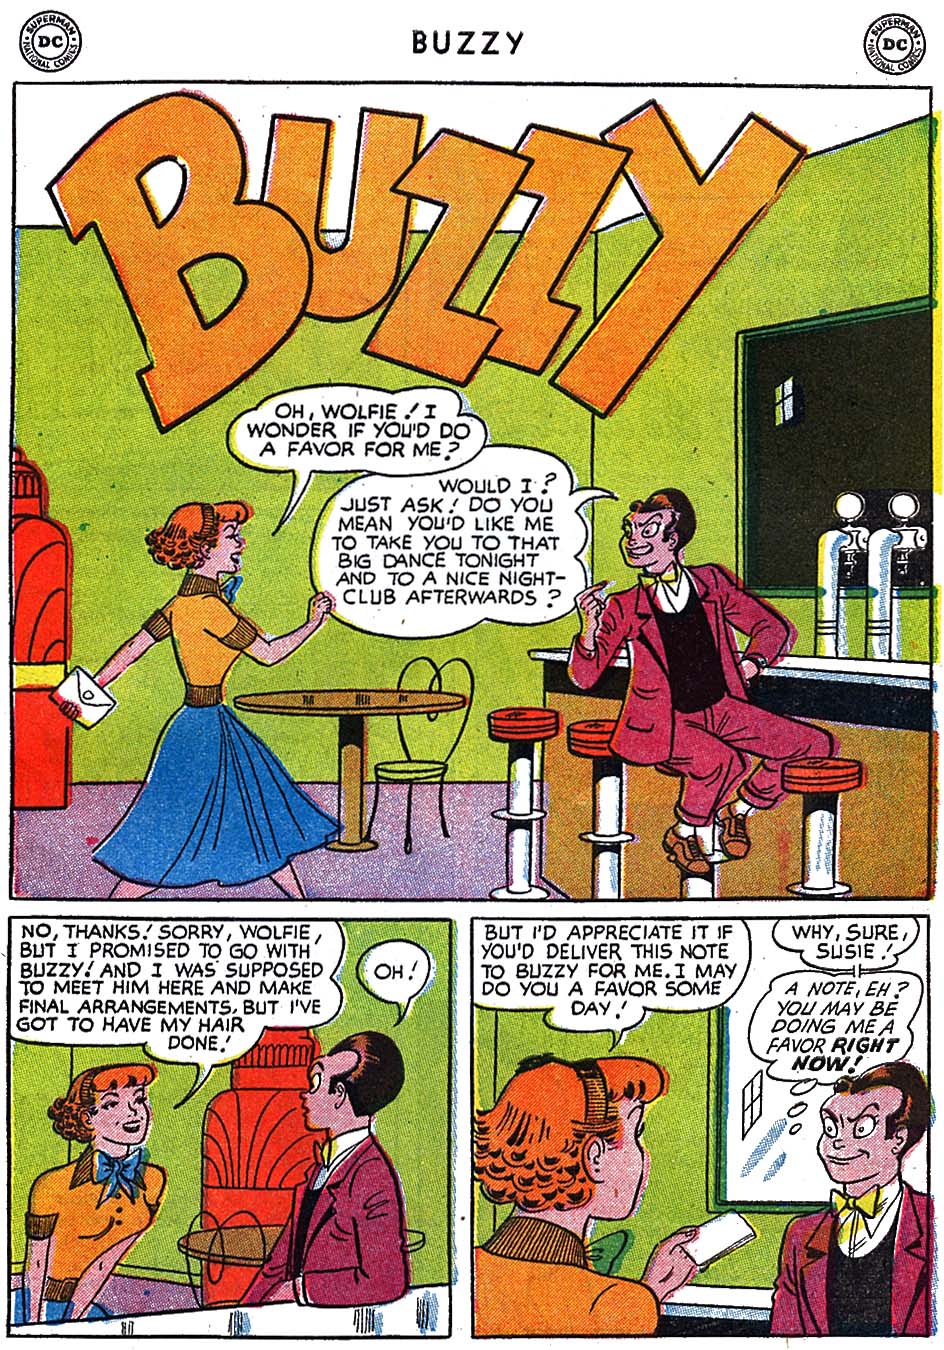 Read online Buzzy comic -  Issue #55 - 35